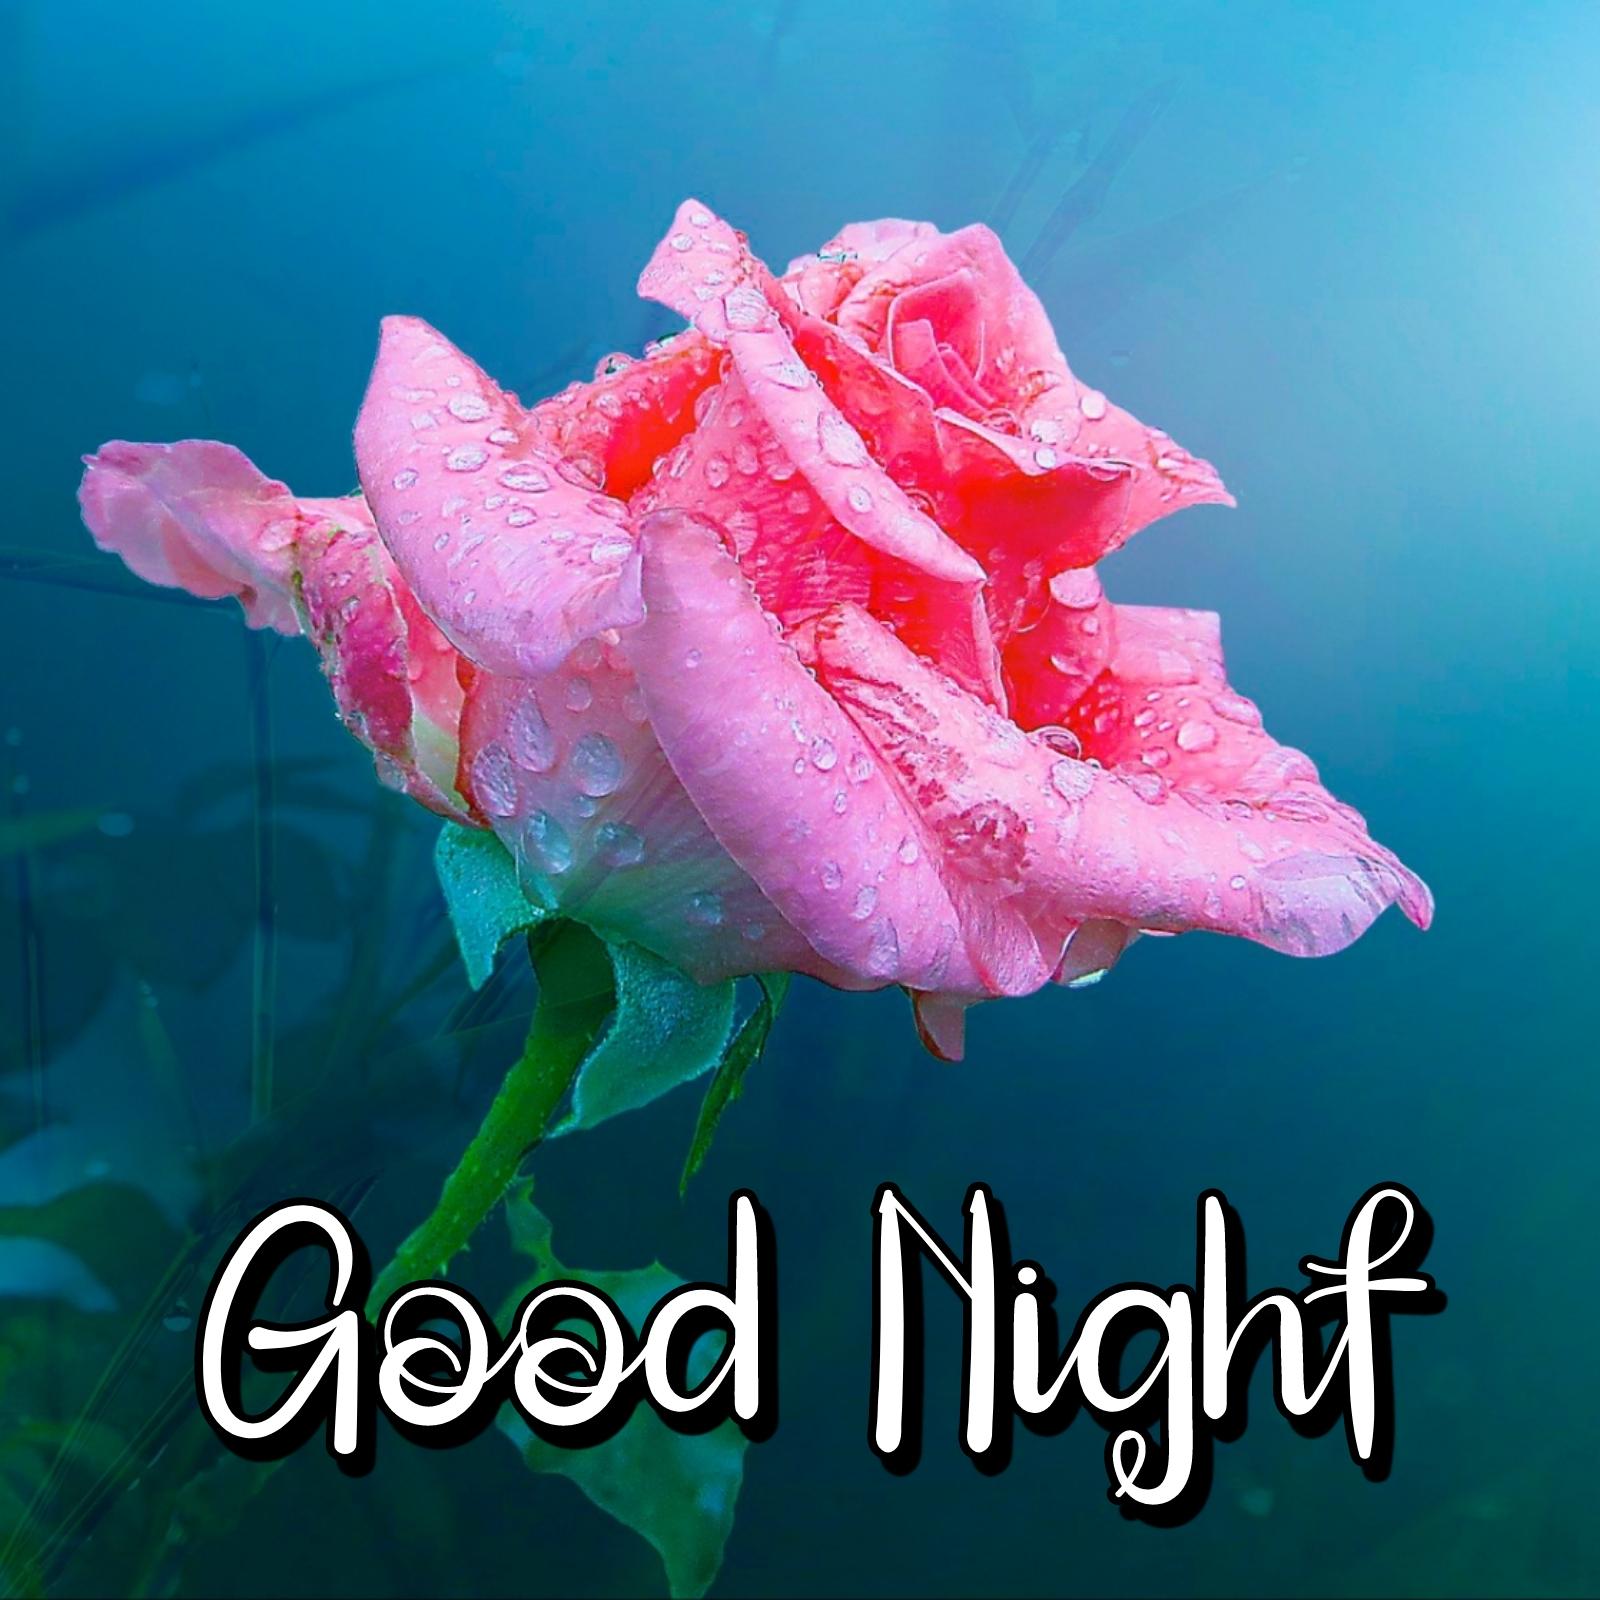 good night flowers images || best good night images - YouTube